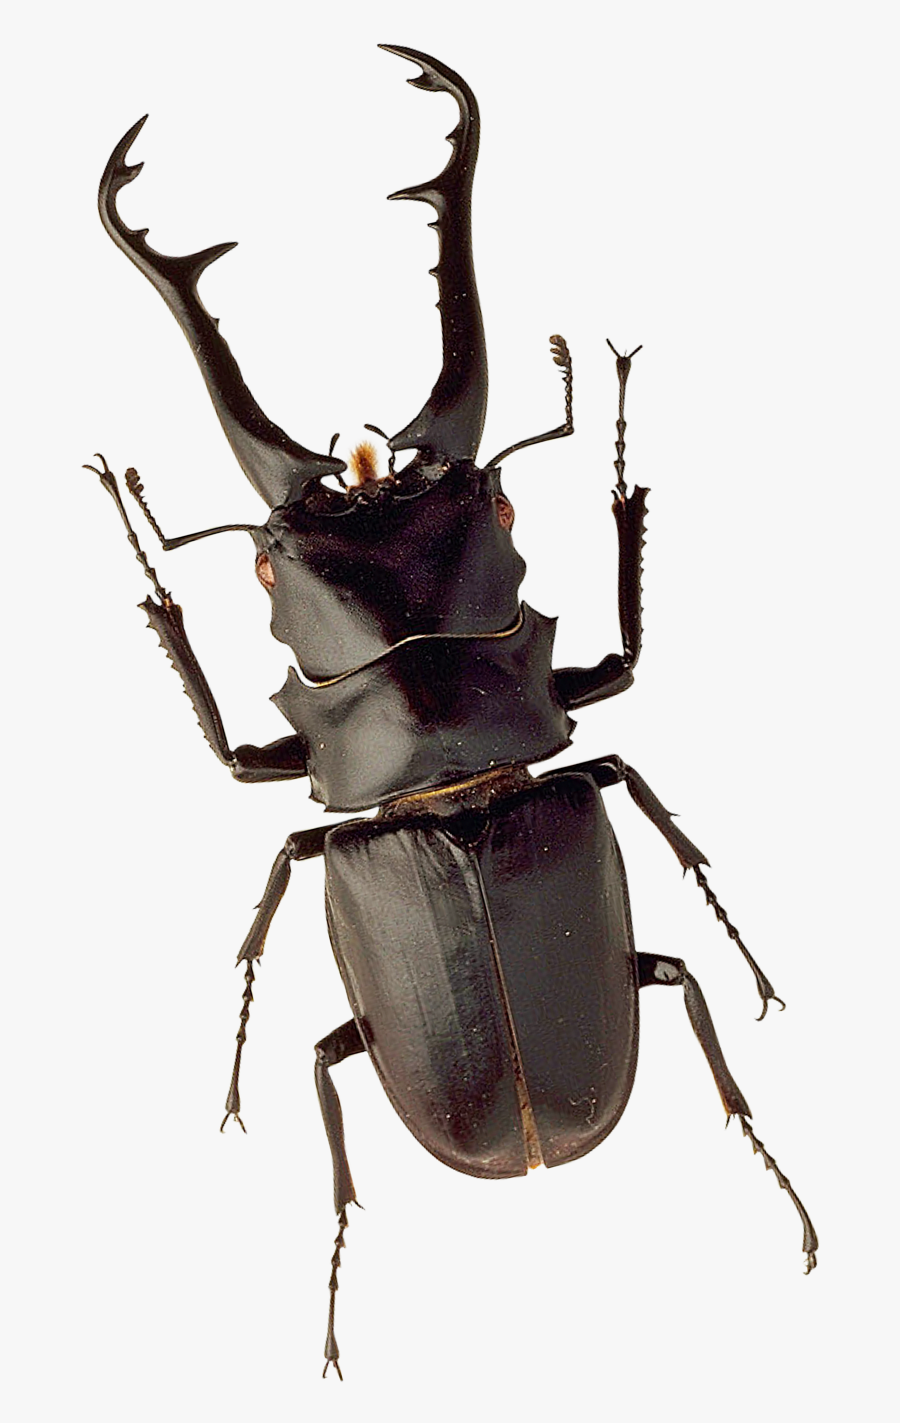 Png Images Pluspng Insect - Stag Beetle Png, Transparent Clipart